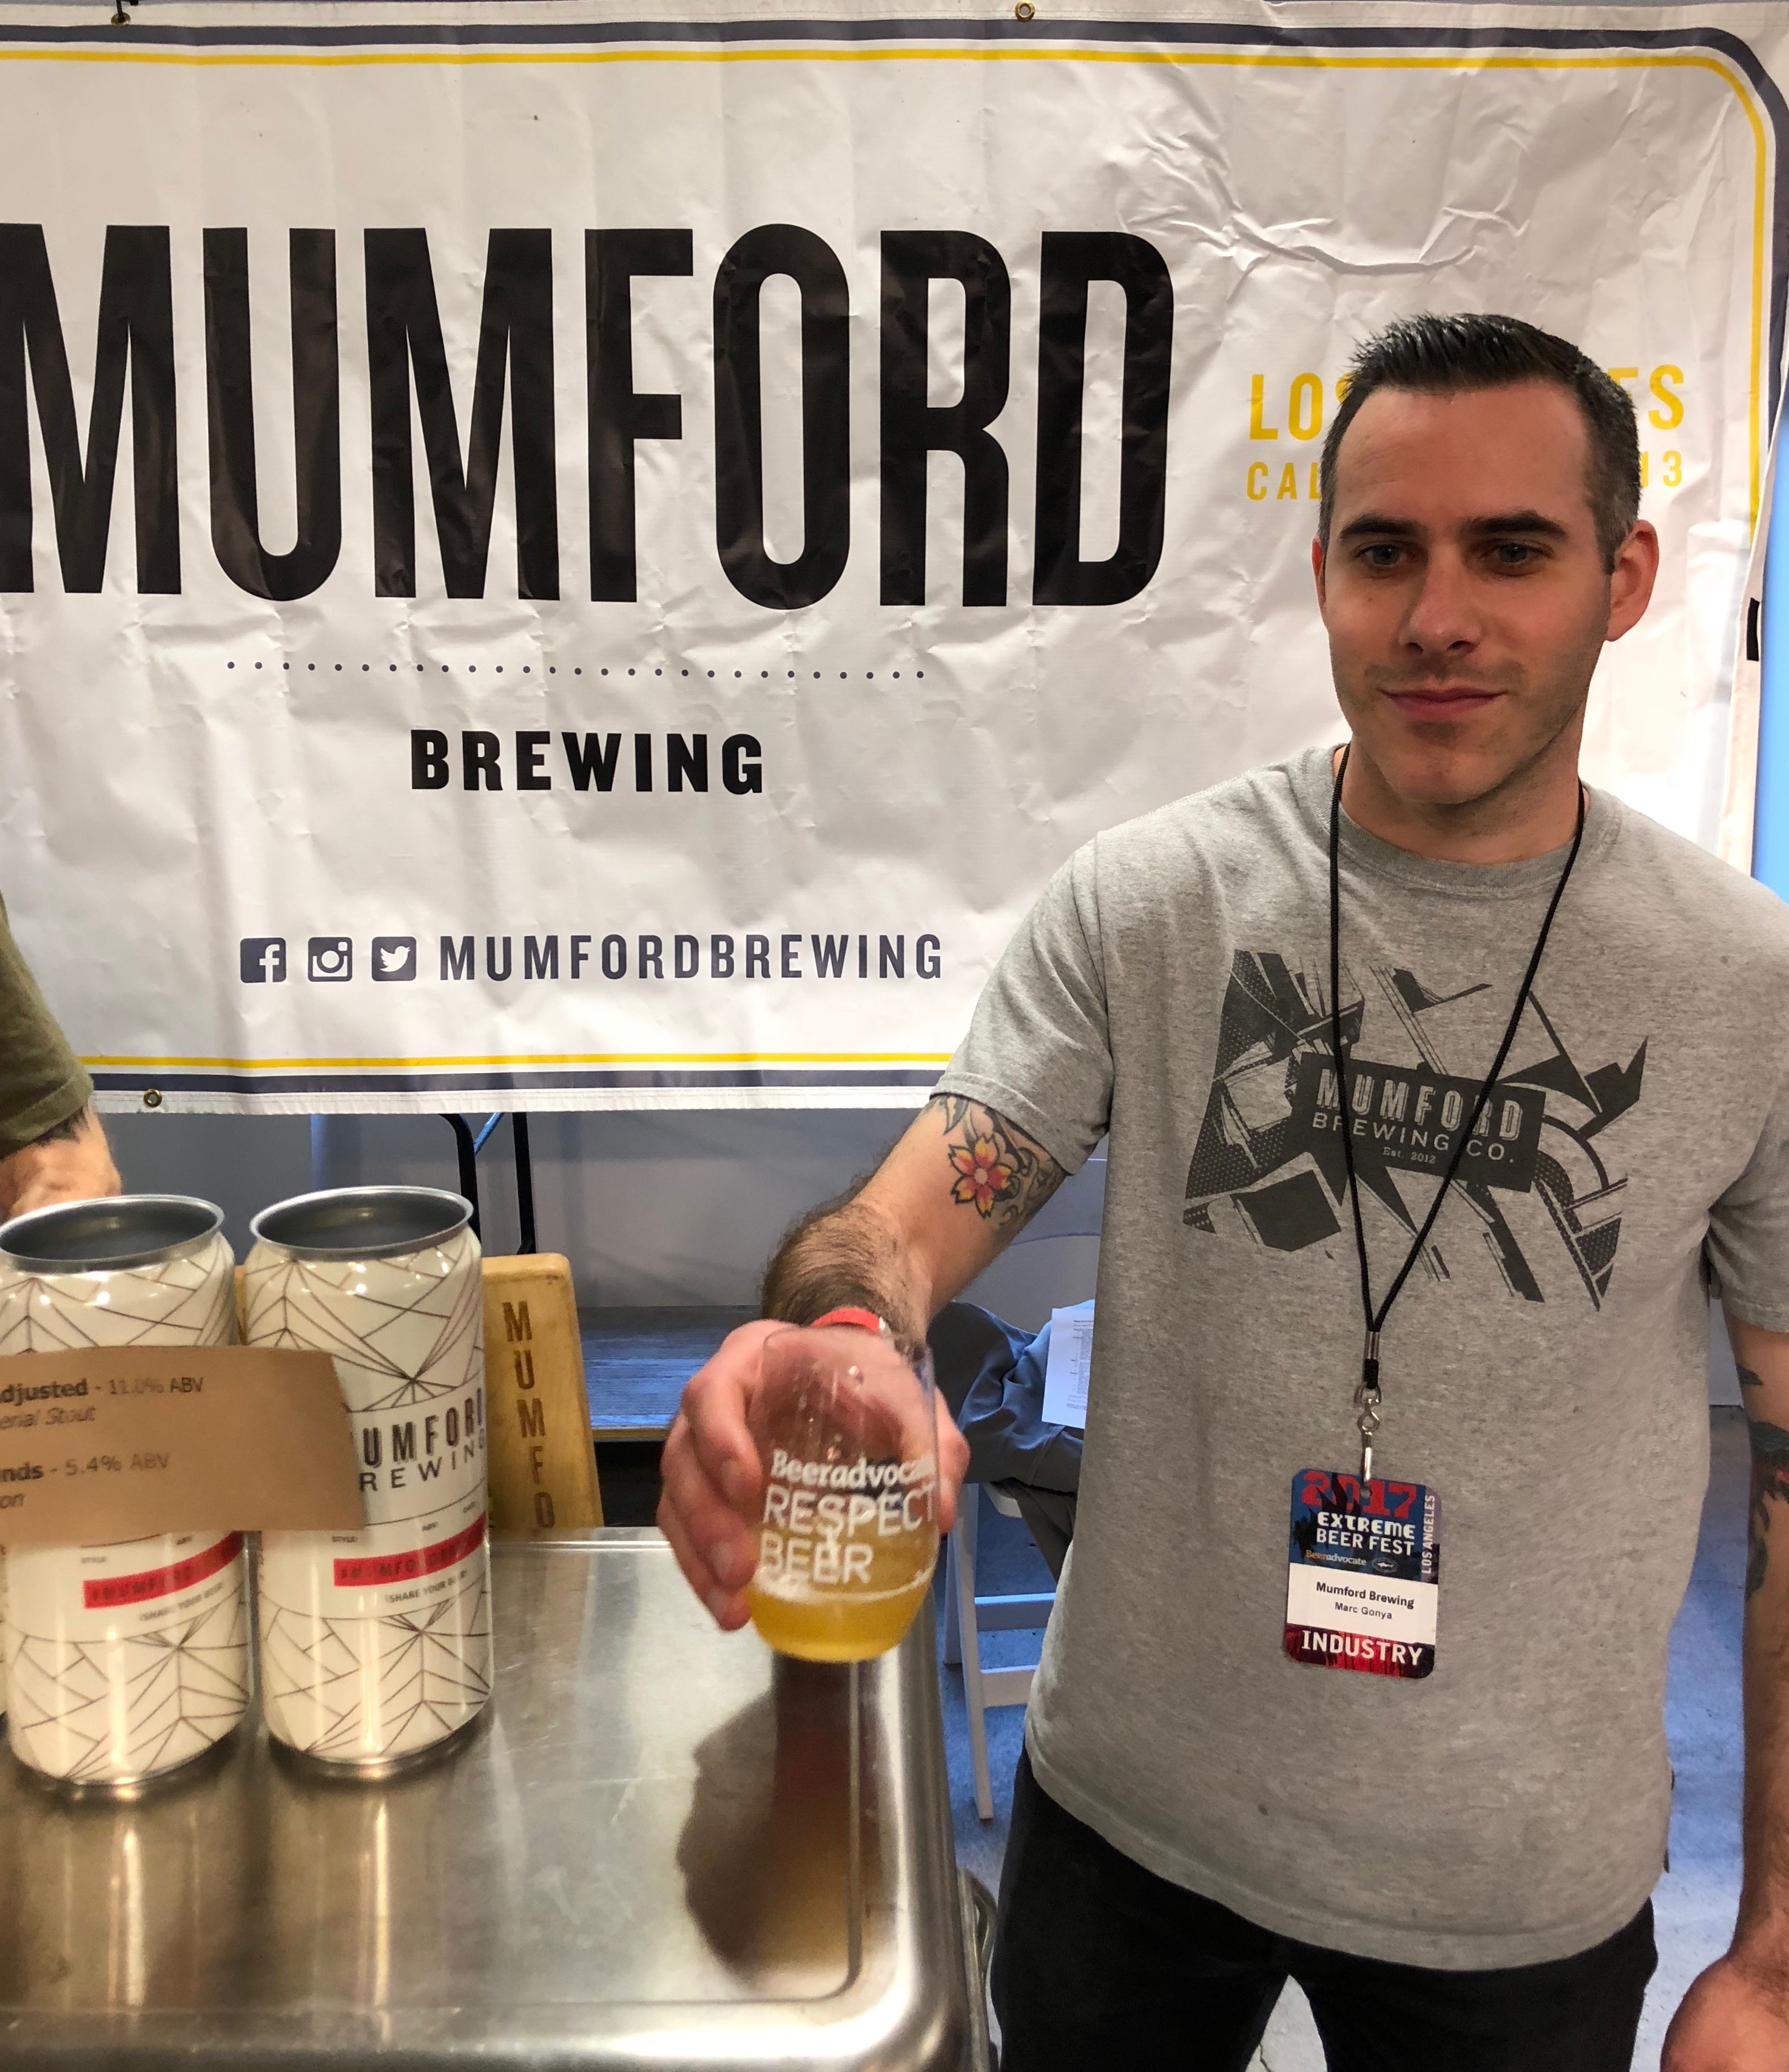 Mumford Brewing at BeerAdvocate Extreme Beer Fest in Los Angeles.